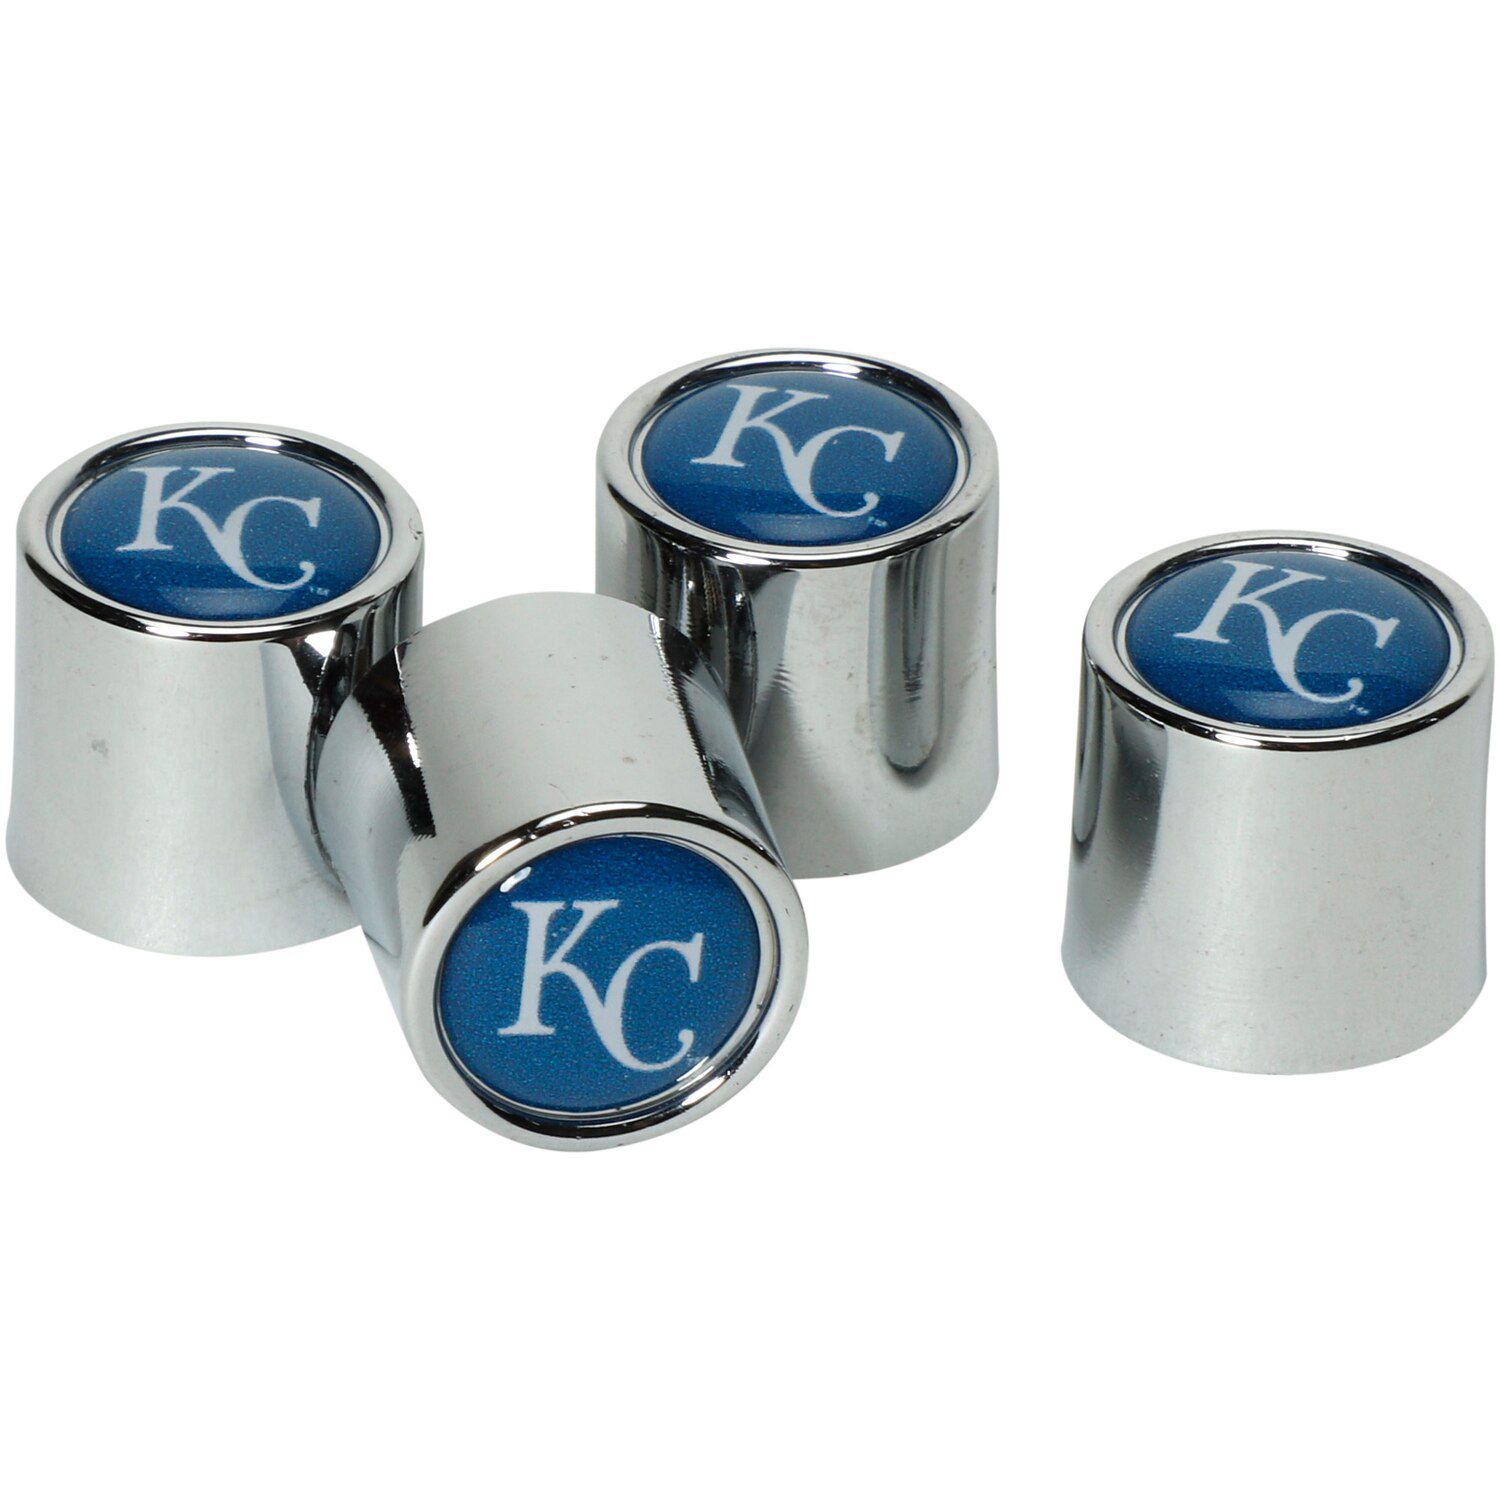 Image for Unbranded WinCraft Kansas City Royals 4-Pack Valve Stem Covers at Kohl's.